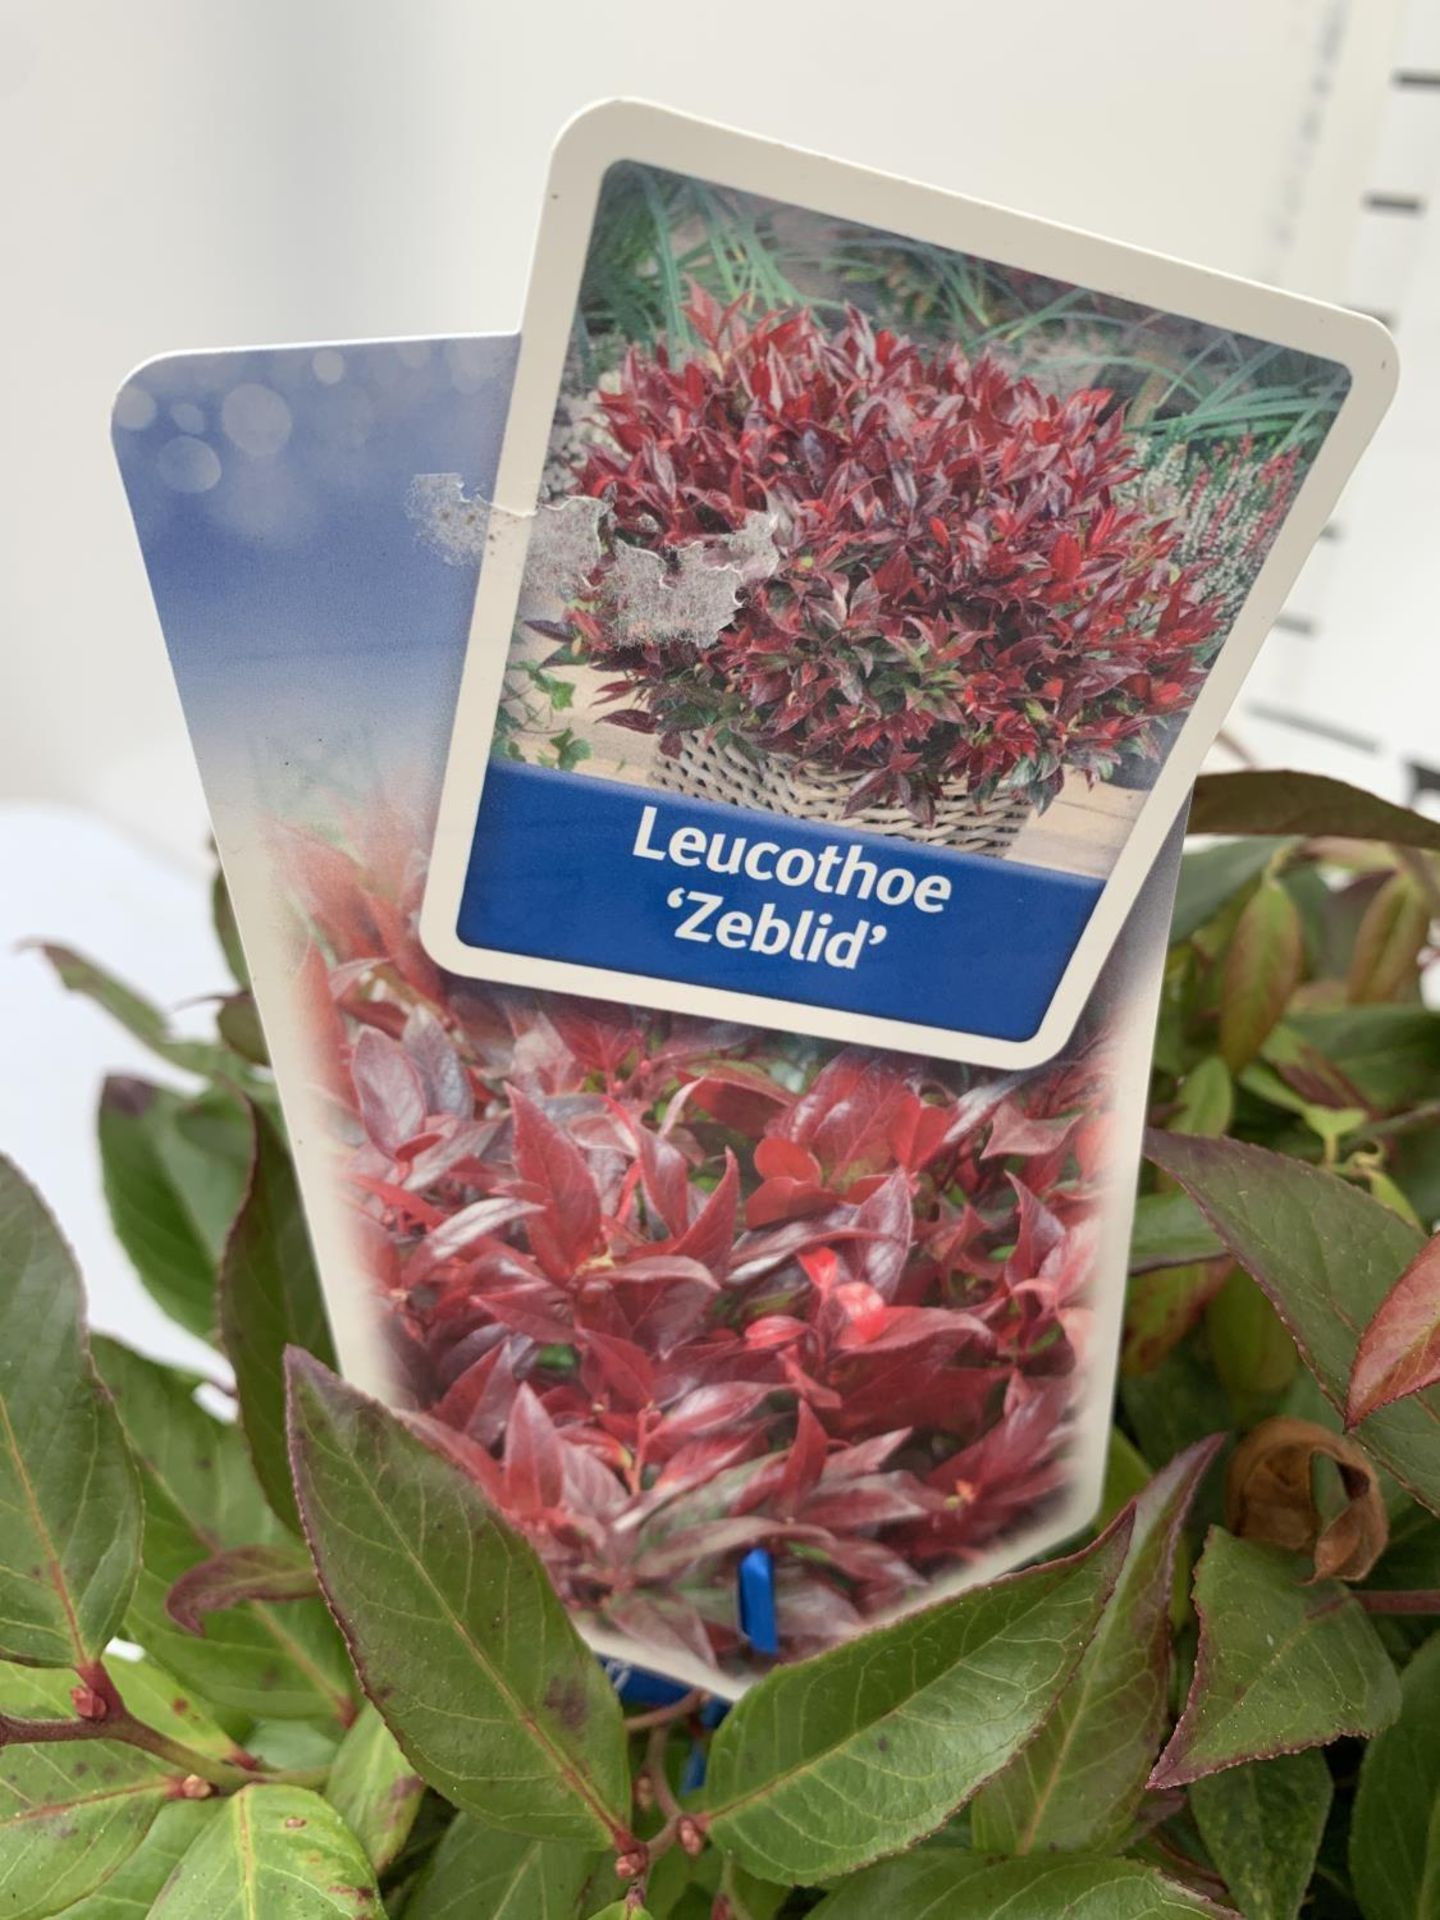 TWO LEUCOTHOE 'ZEBLID' APPROX 40CM IN HEIGHT IN 2LTR POTS PLUS VAT TO BE SOLD FOR THE TWO - Image 4 of 4